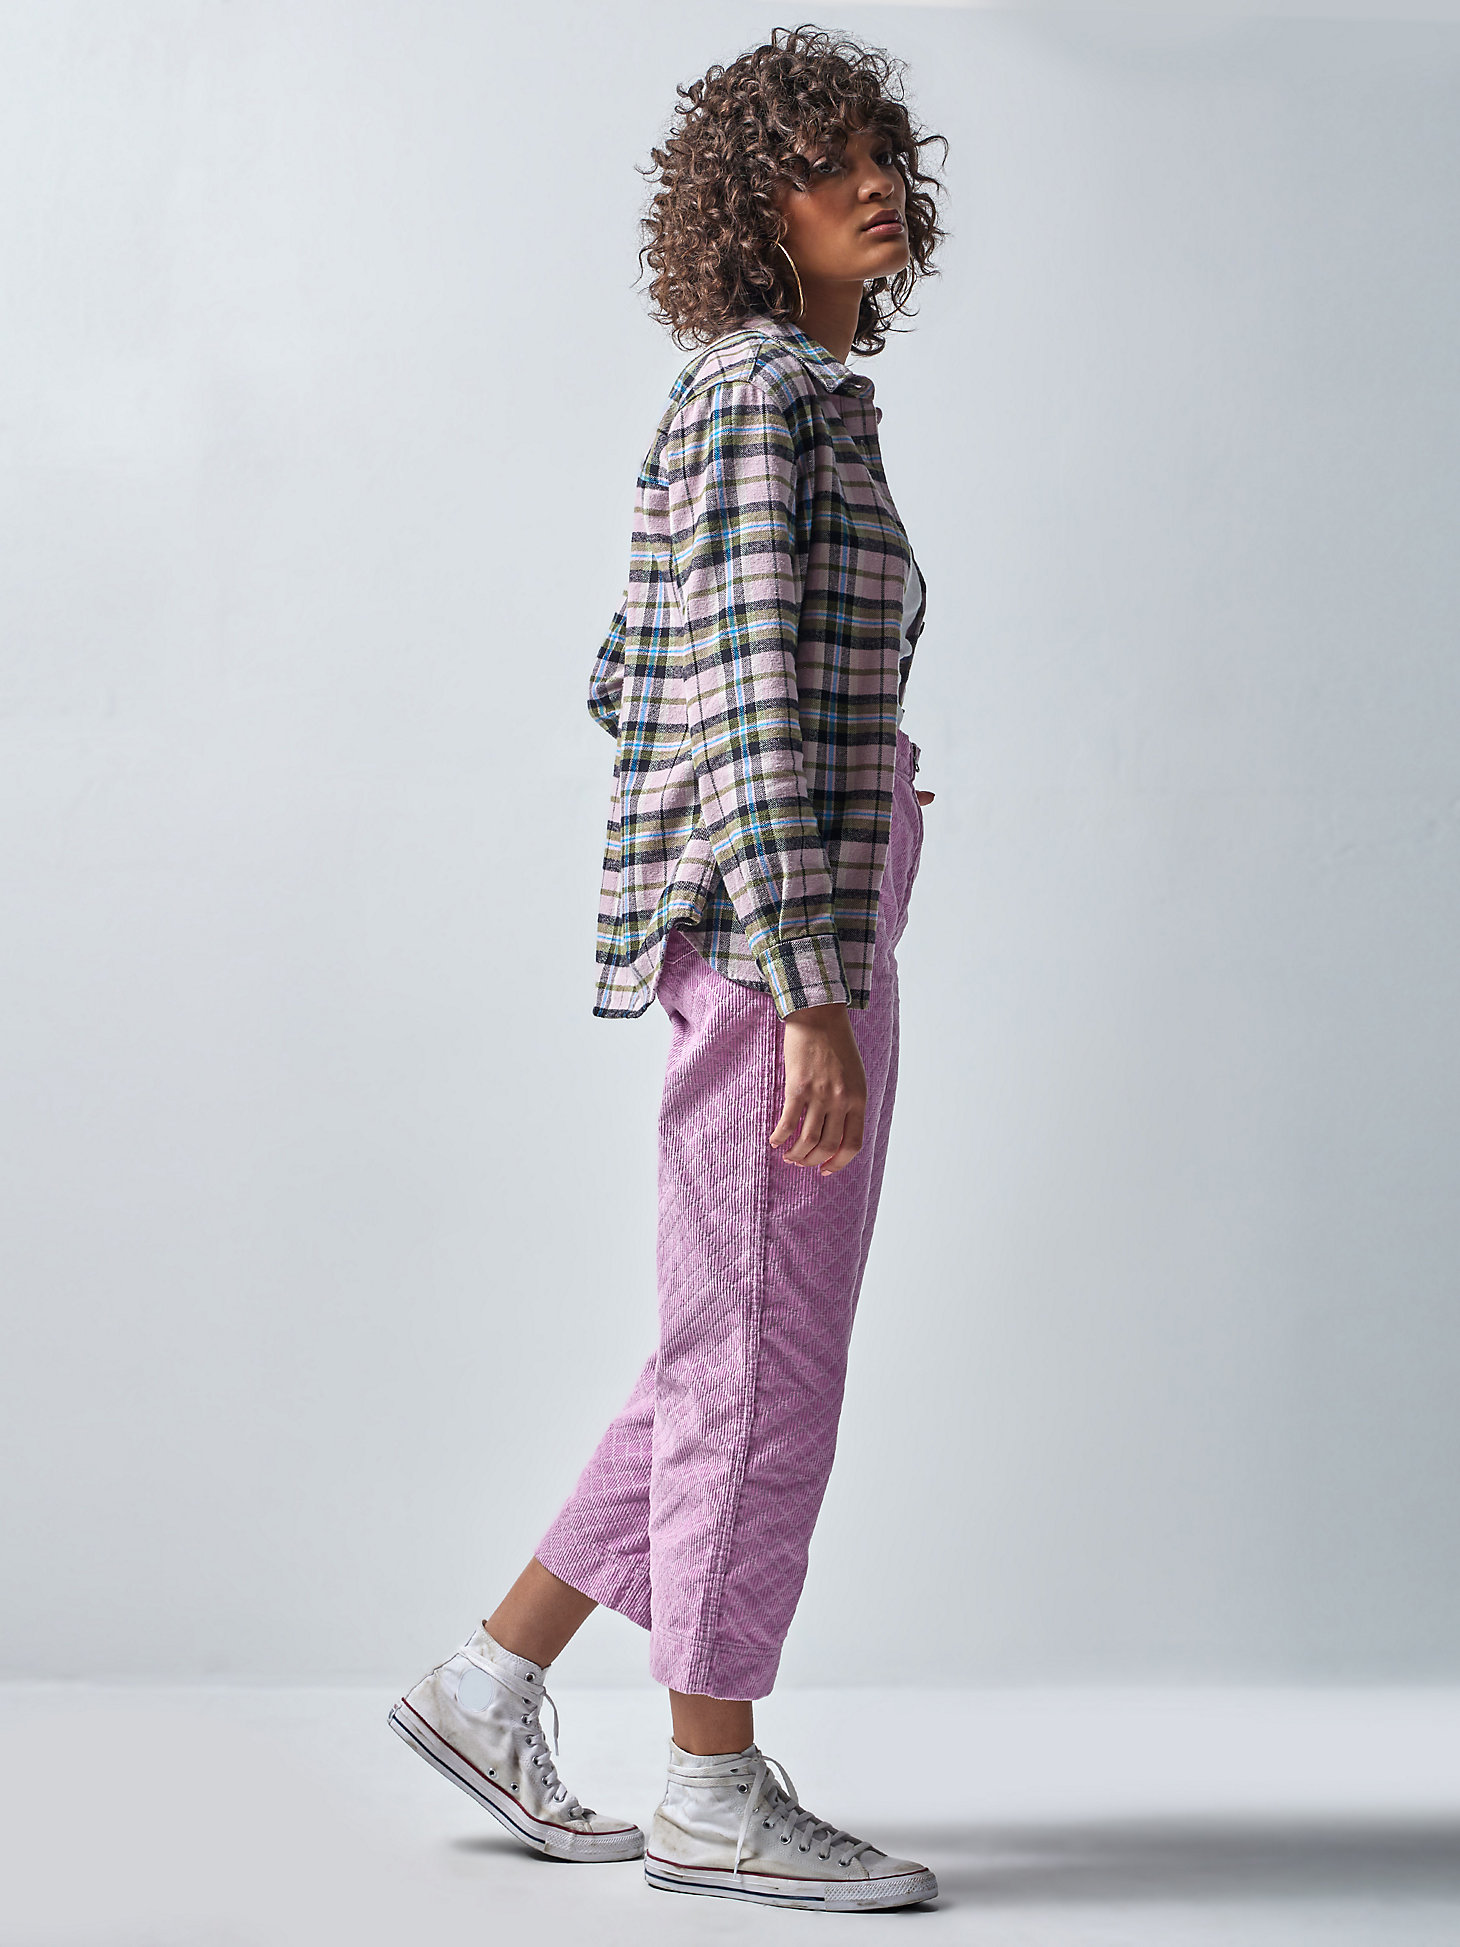 Women's Lee® x The Brooklyn Circus® Plaid Overshirt in Soft Misty Plaid alternative view 2